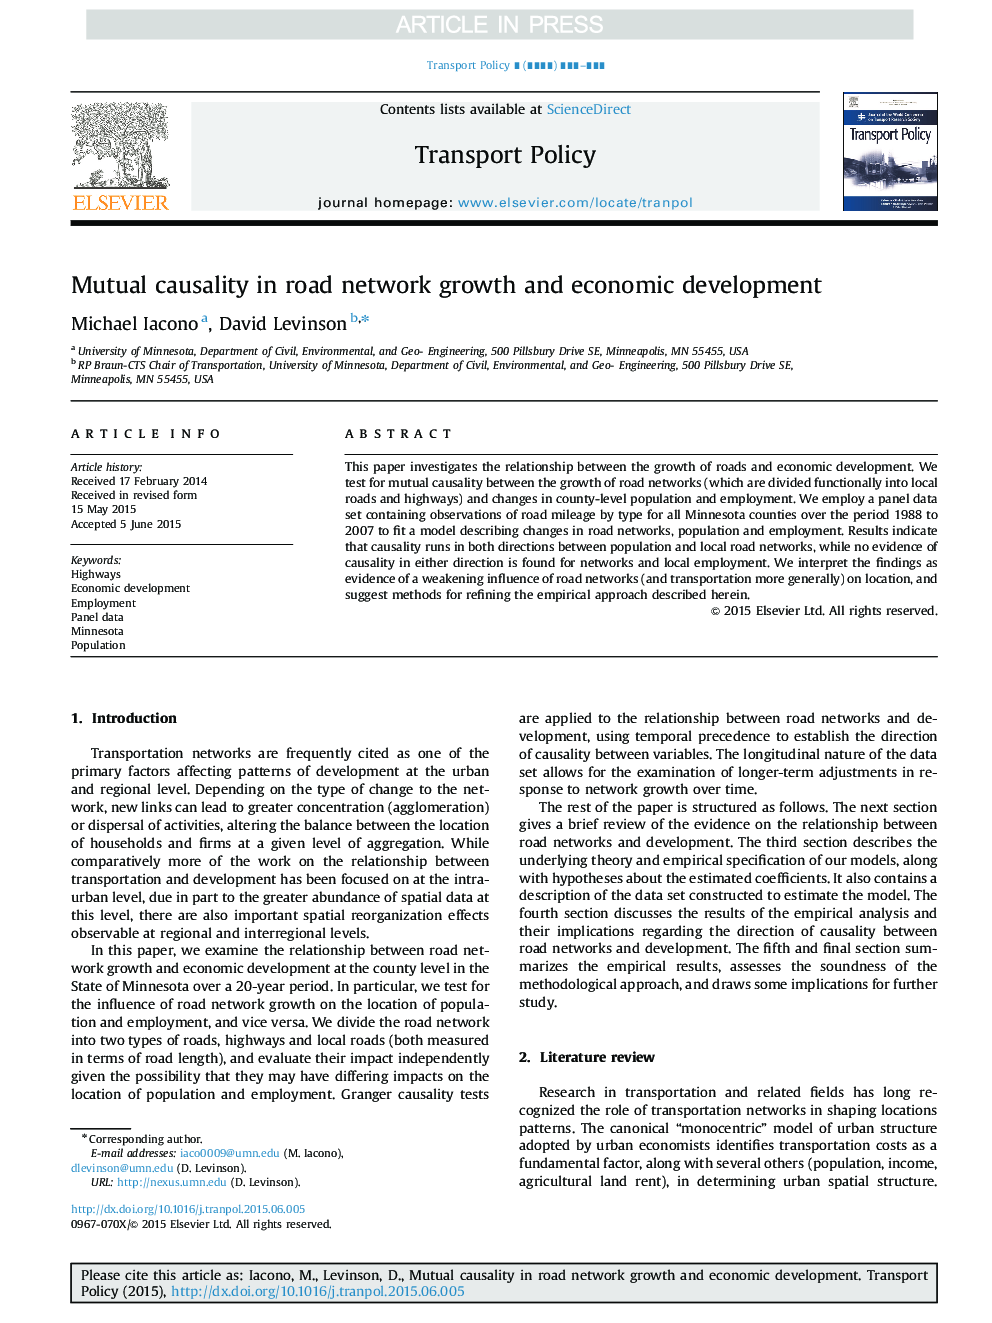 Mutual causality in road network growth and economic development